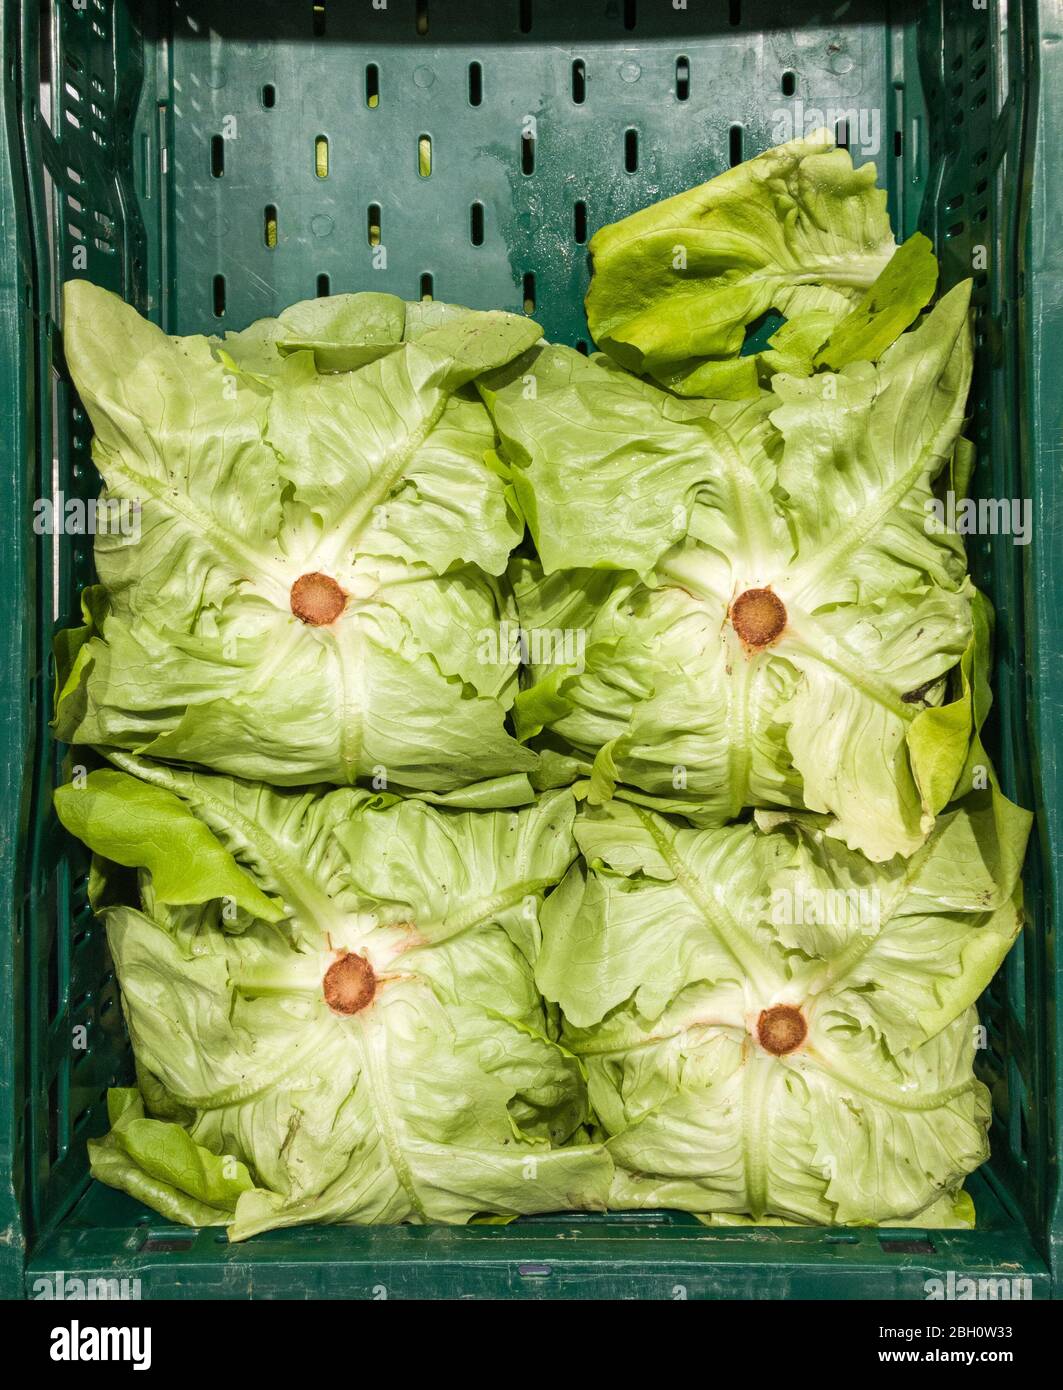 Green cabbage lettuce, Lactuca sativa, for sale on display in a plastic tray in a supermarket in Germany, Western Europe Stock Photo